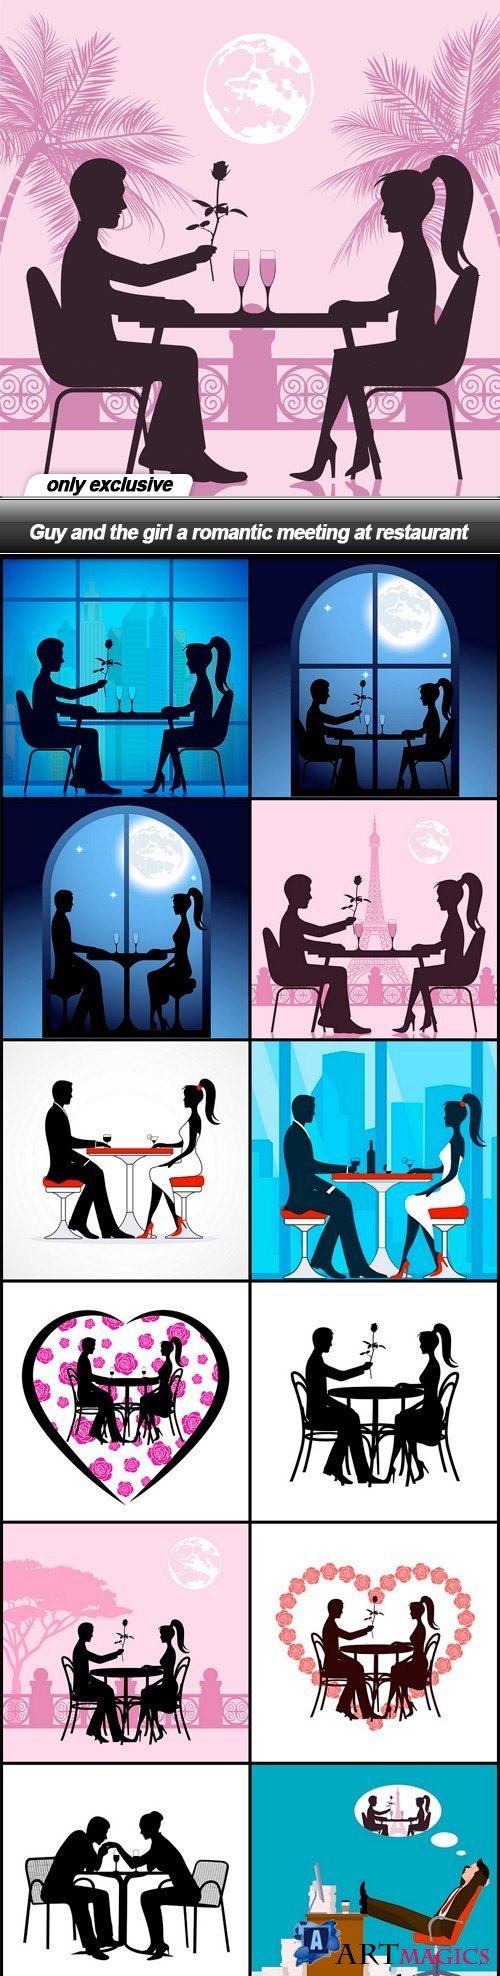 Guy and the girl a romantic meeting at restaurant - 13 EPS